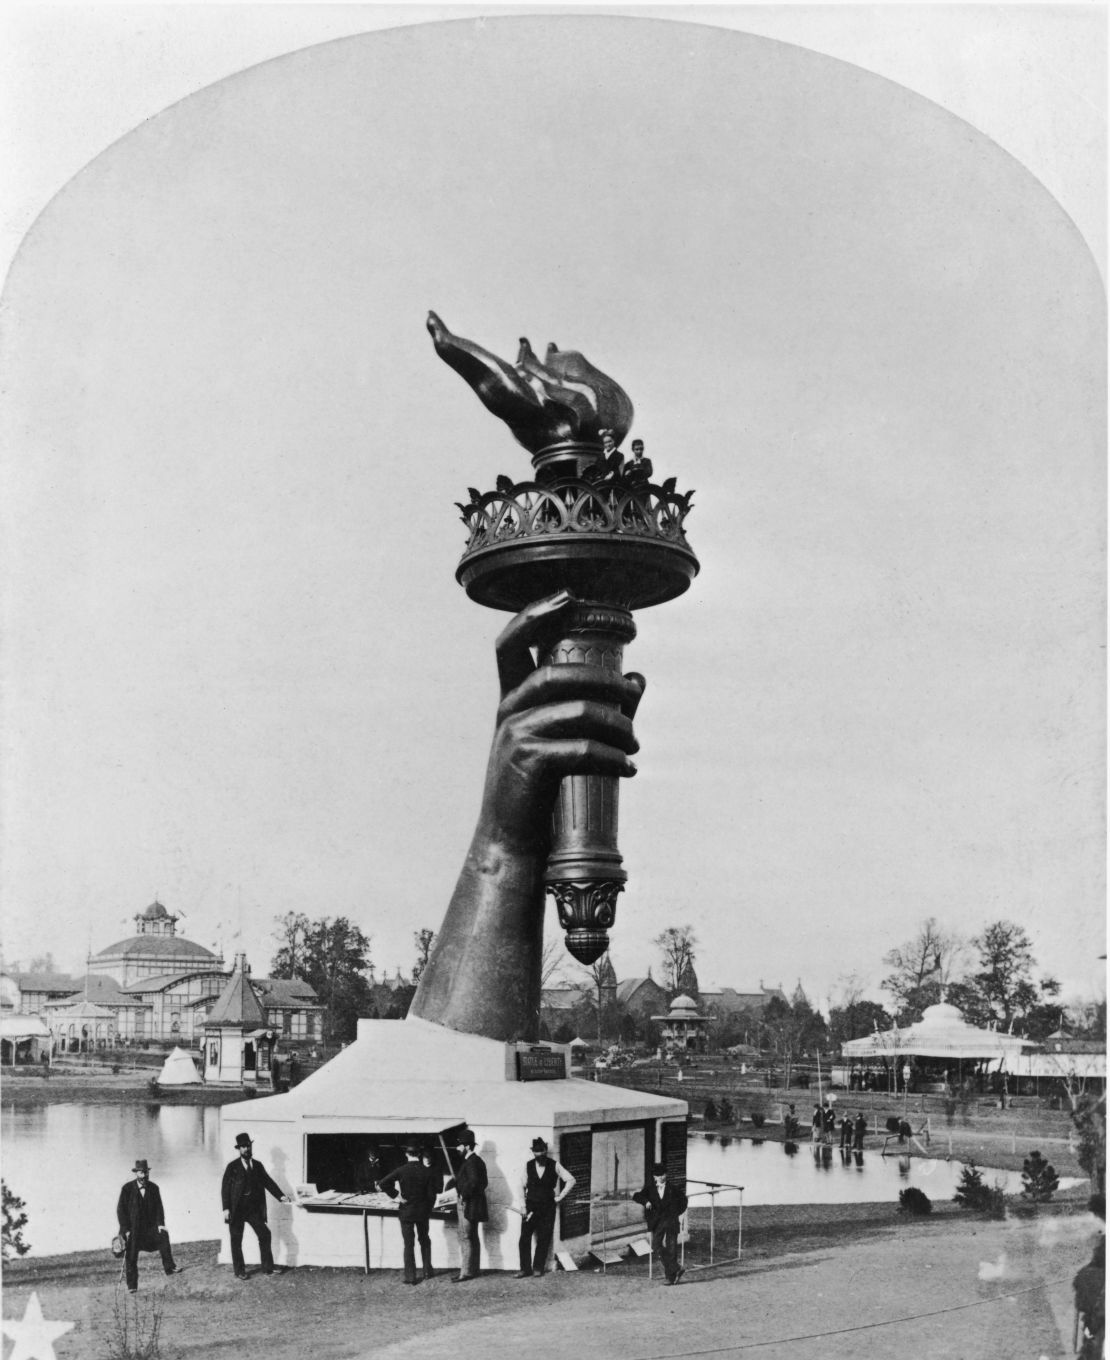 The forearm and torch of the Statue of Liberty on display at the Centennial Exposition in Philadelphia, 1876. To raise funds for the completion of the statue and its pedestal, members of the public could pay 50 cents to climb to the balcony of the torch.